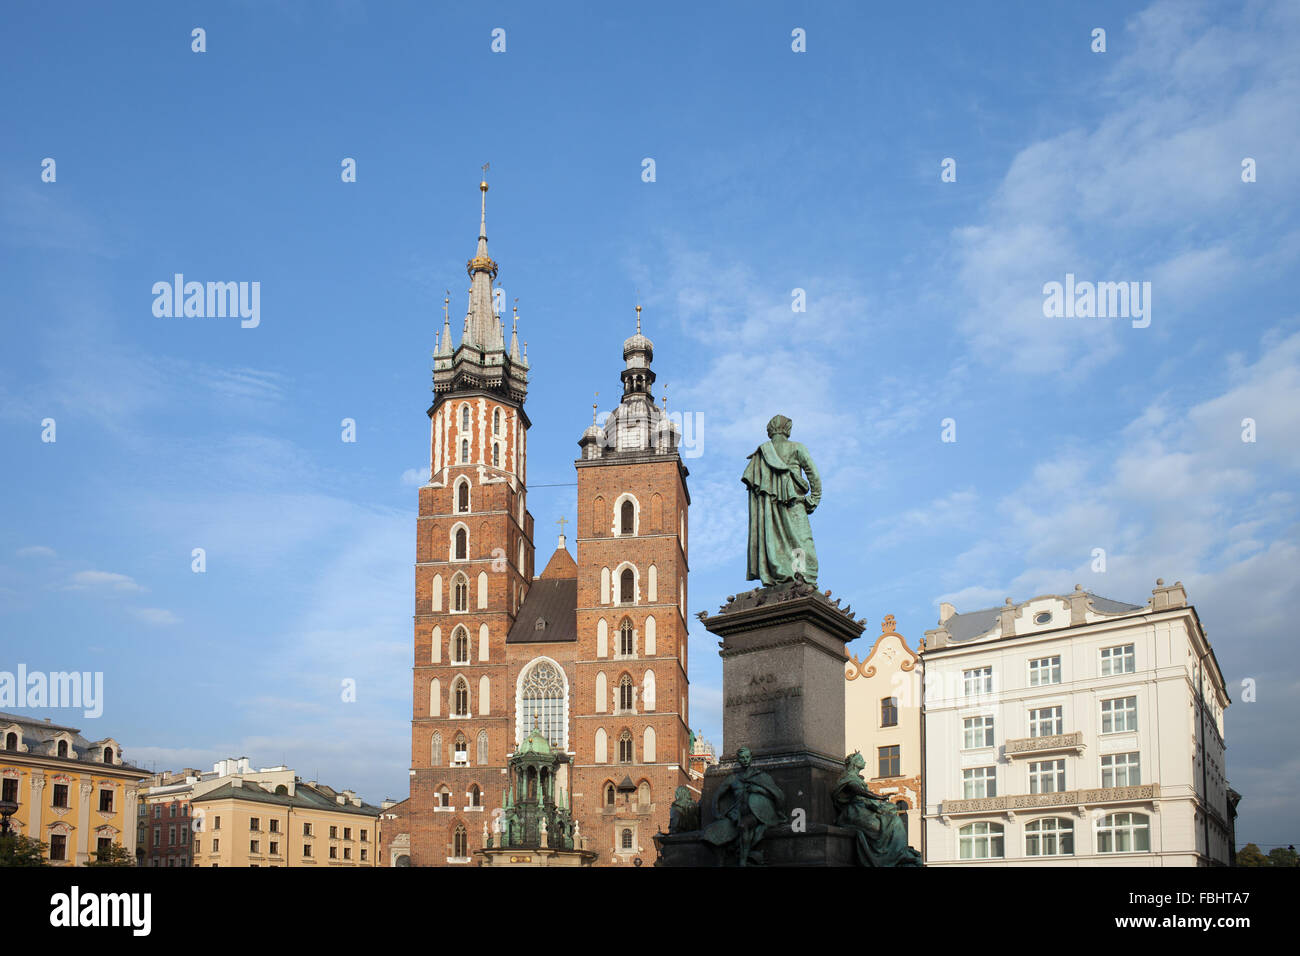 City of Krakow in Poland, Old Town skyline, St. Mary’s Basilica and Adam Mickiewicz monument Stock Photo